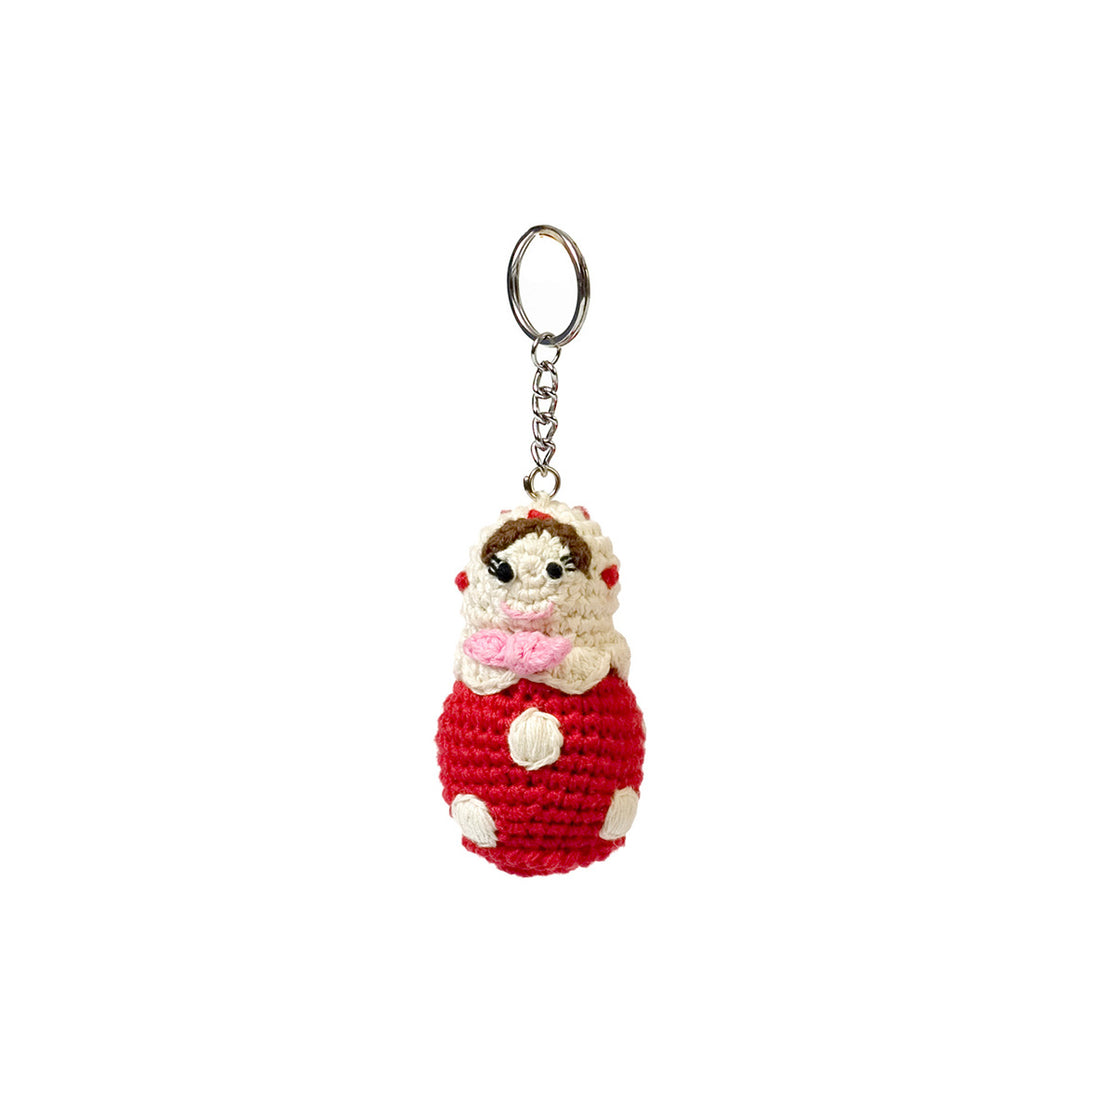 anne-claire-petit-russian-doll-keyholder-red-1